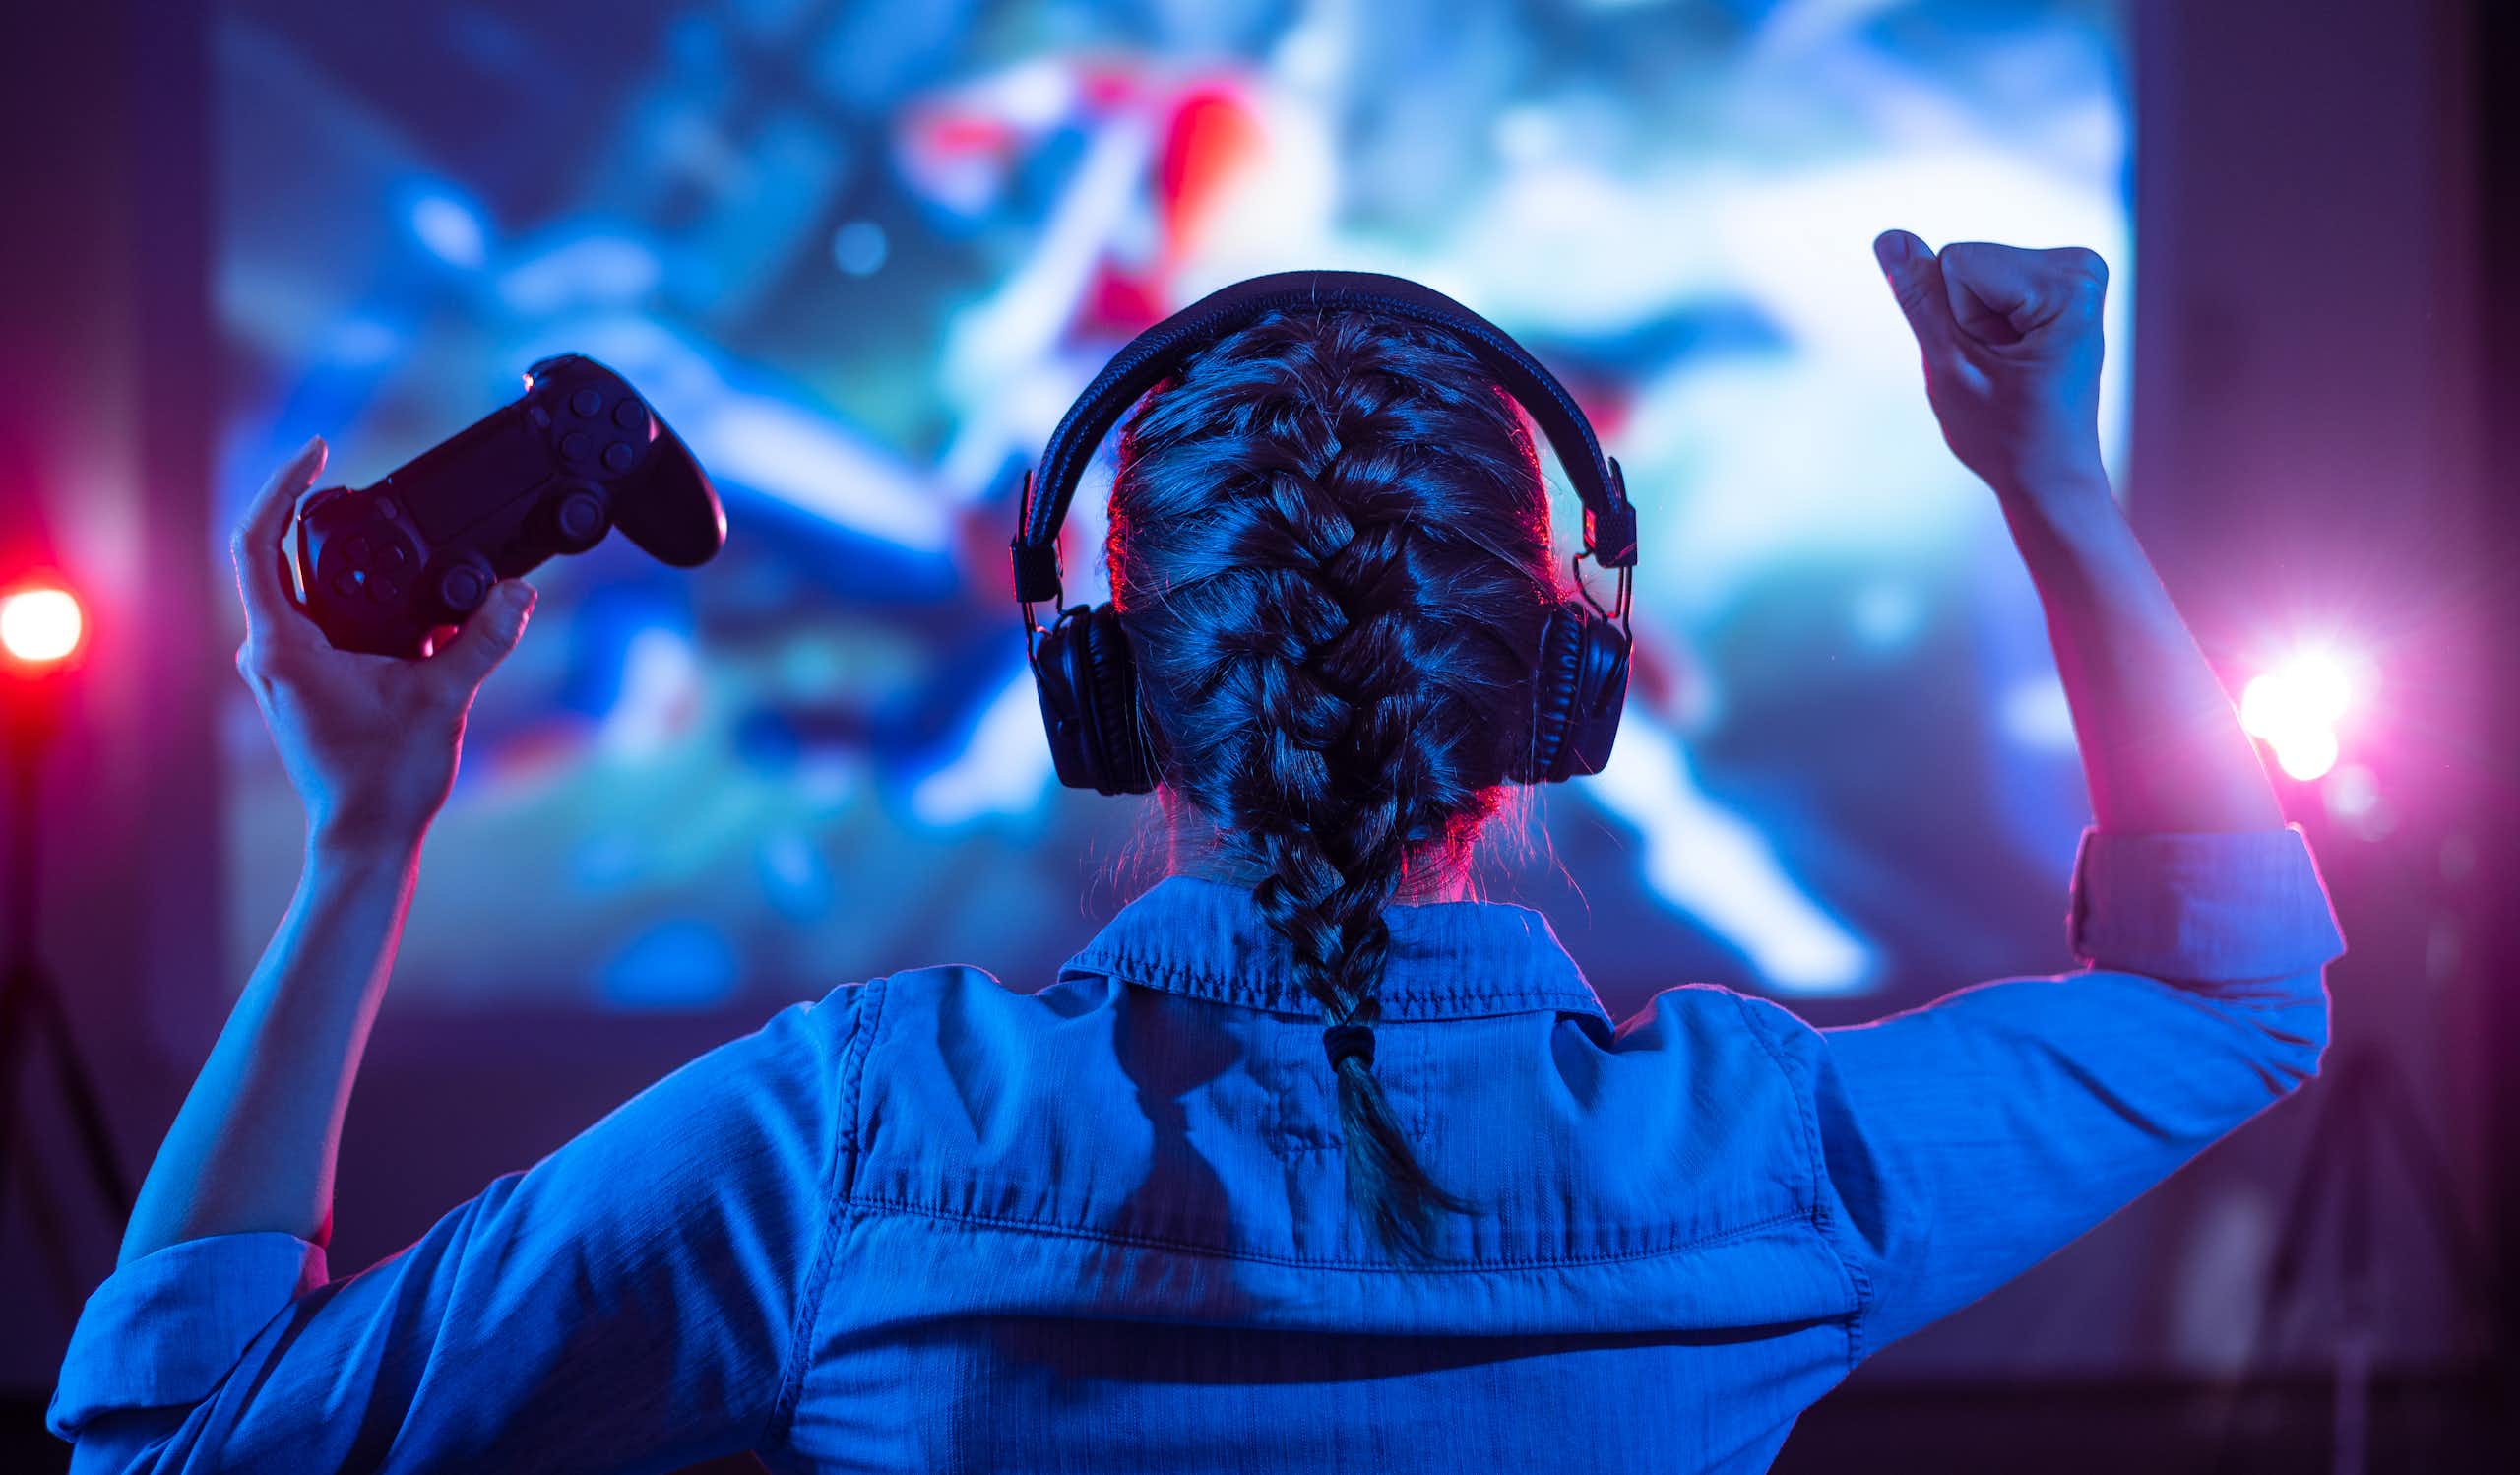 Girl in headphones plays a video game on the big TV screen